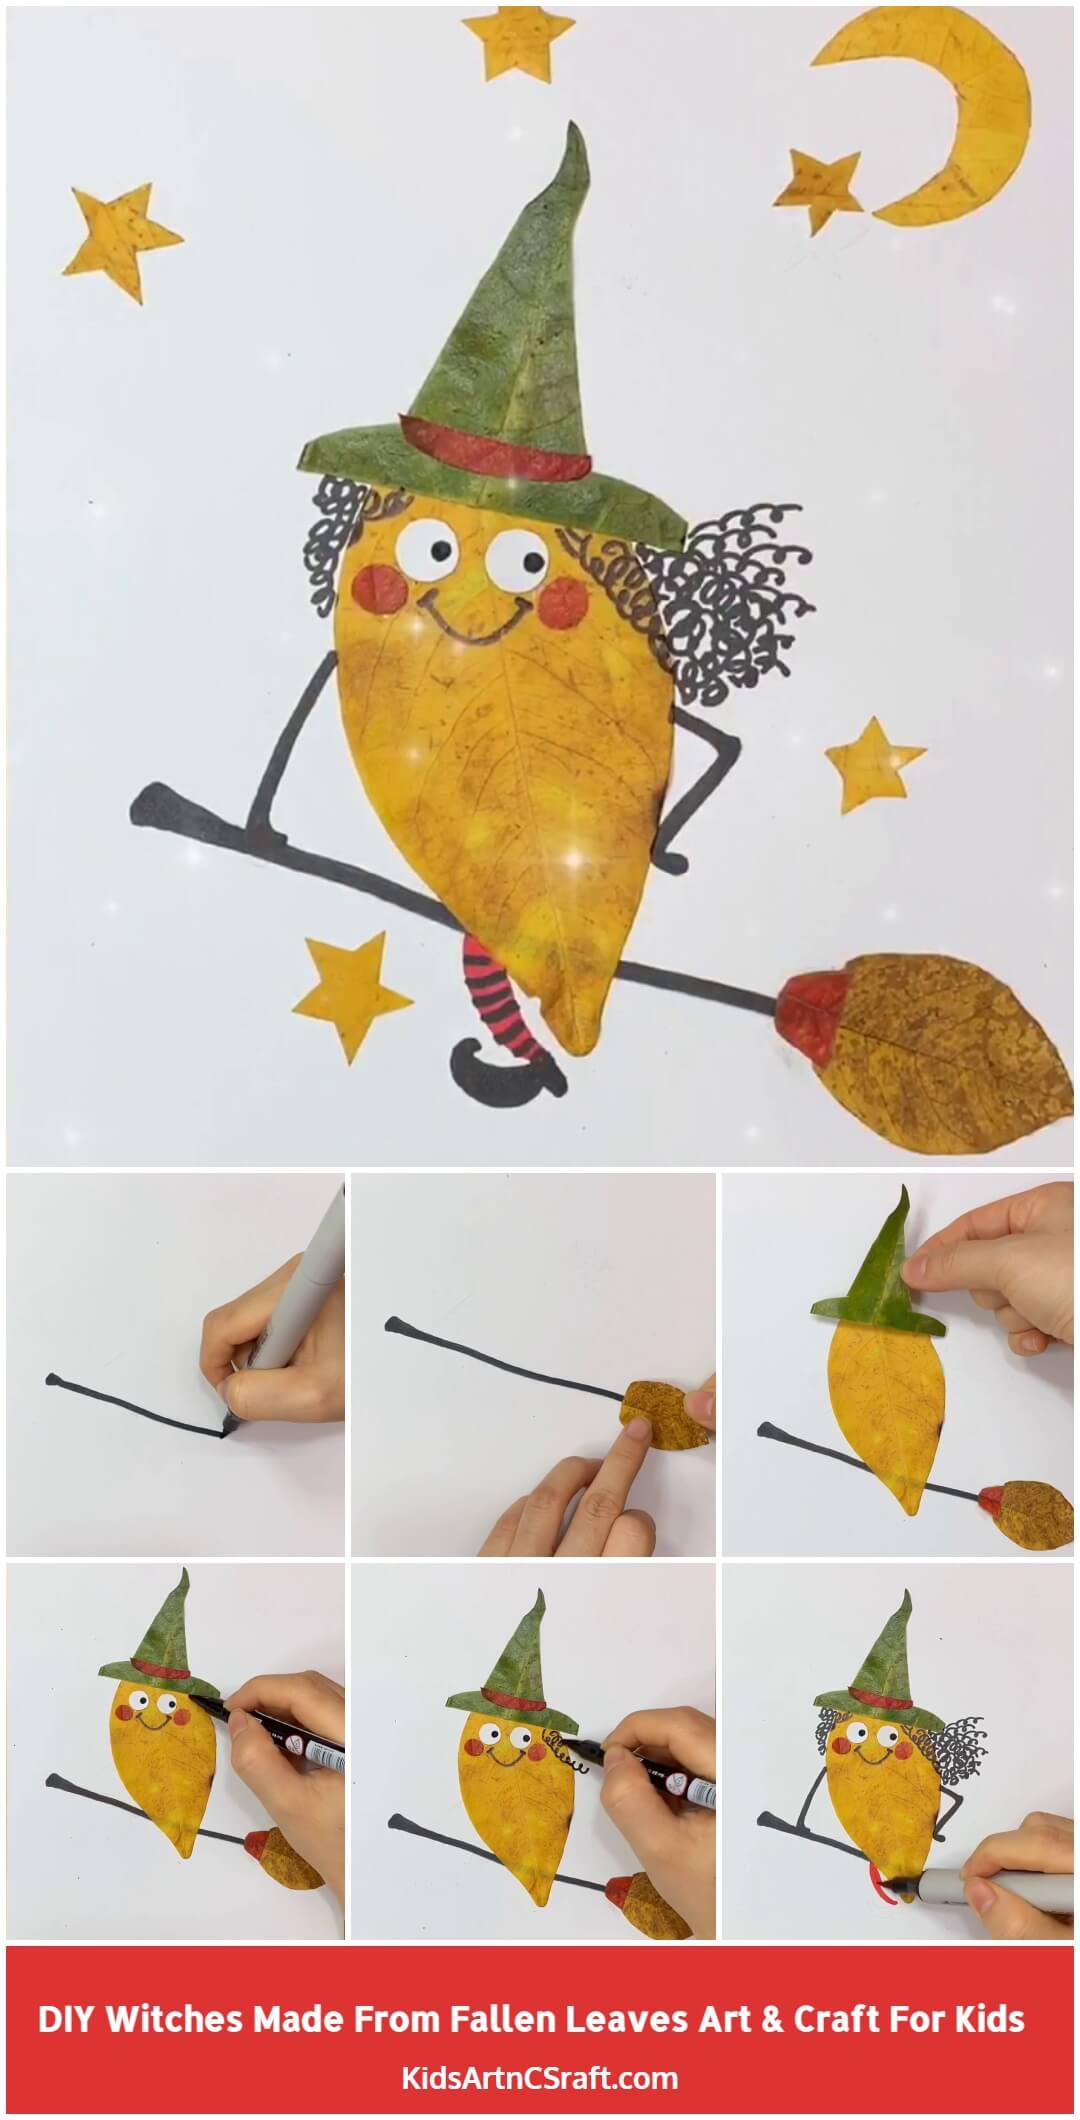  DIY Witches Made from Fallen Leaves Art and Craft for Kids- Step by Step Tutorial